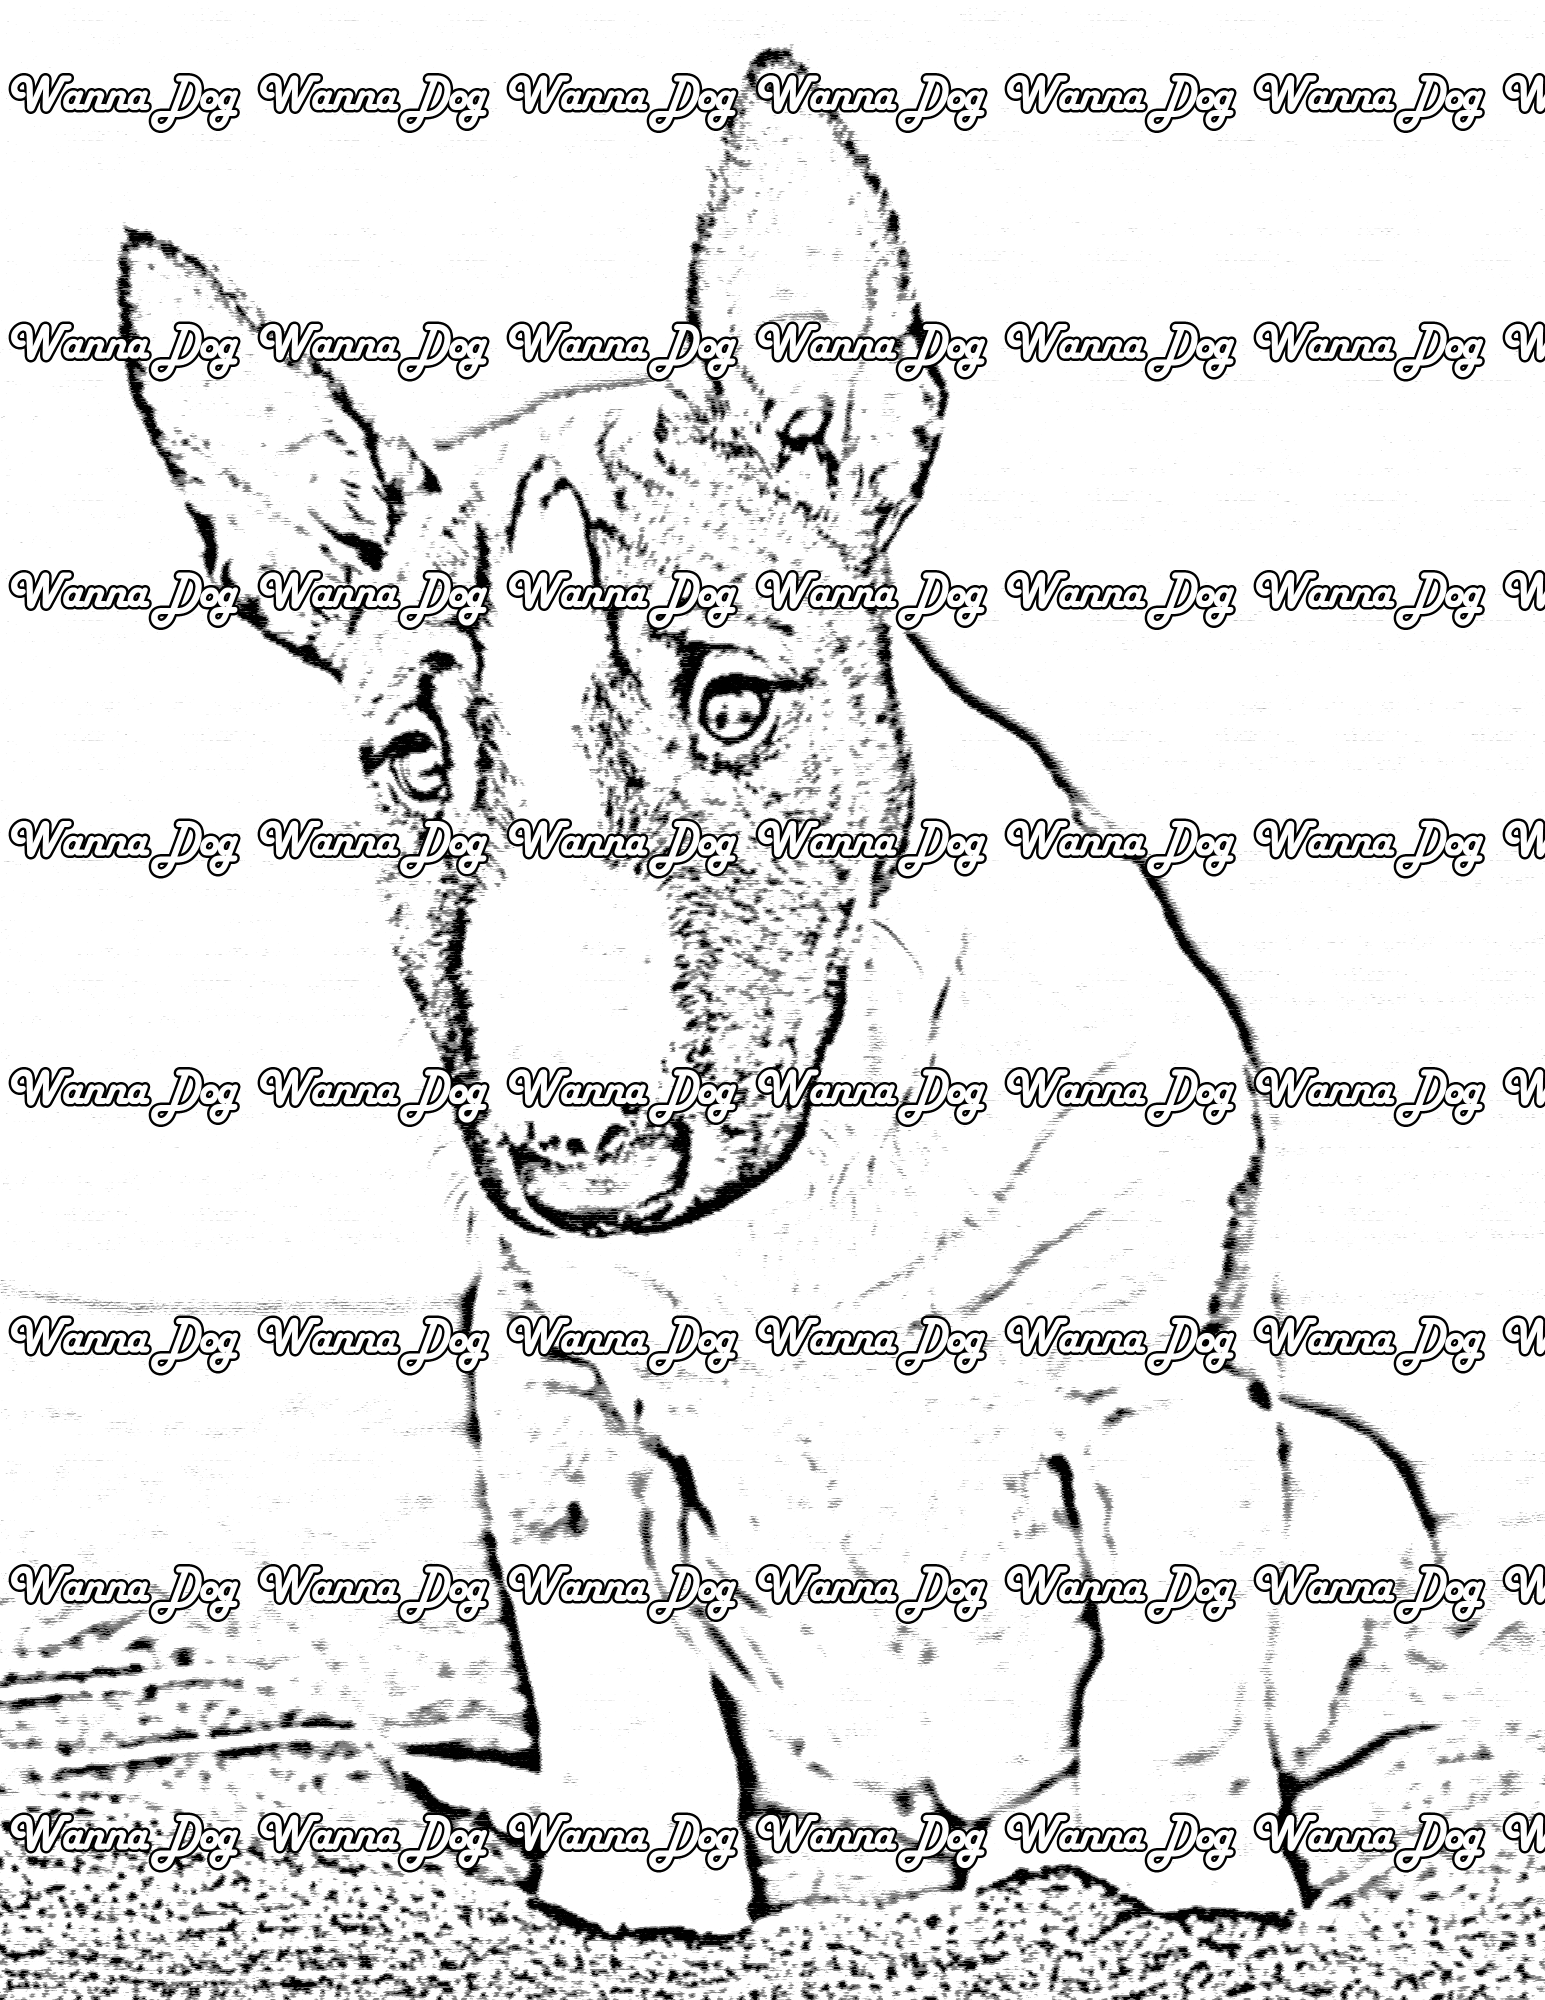 Bull Terrier Coloring Page of a Bull Terrier posing